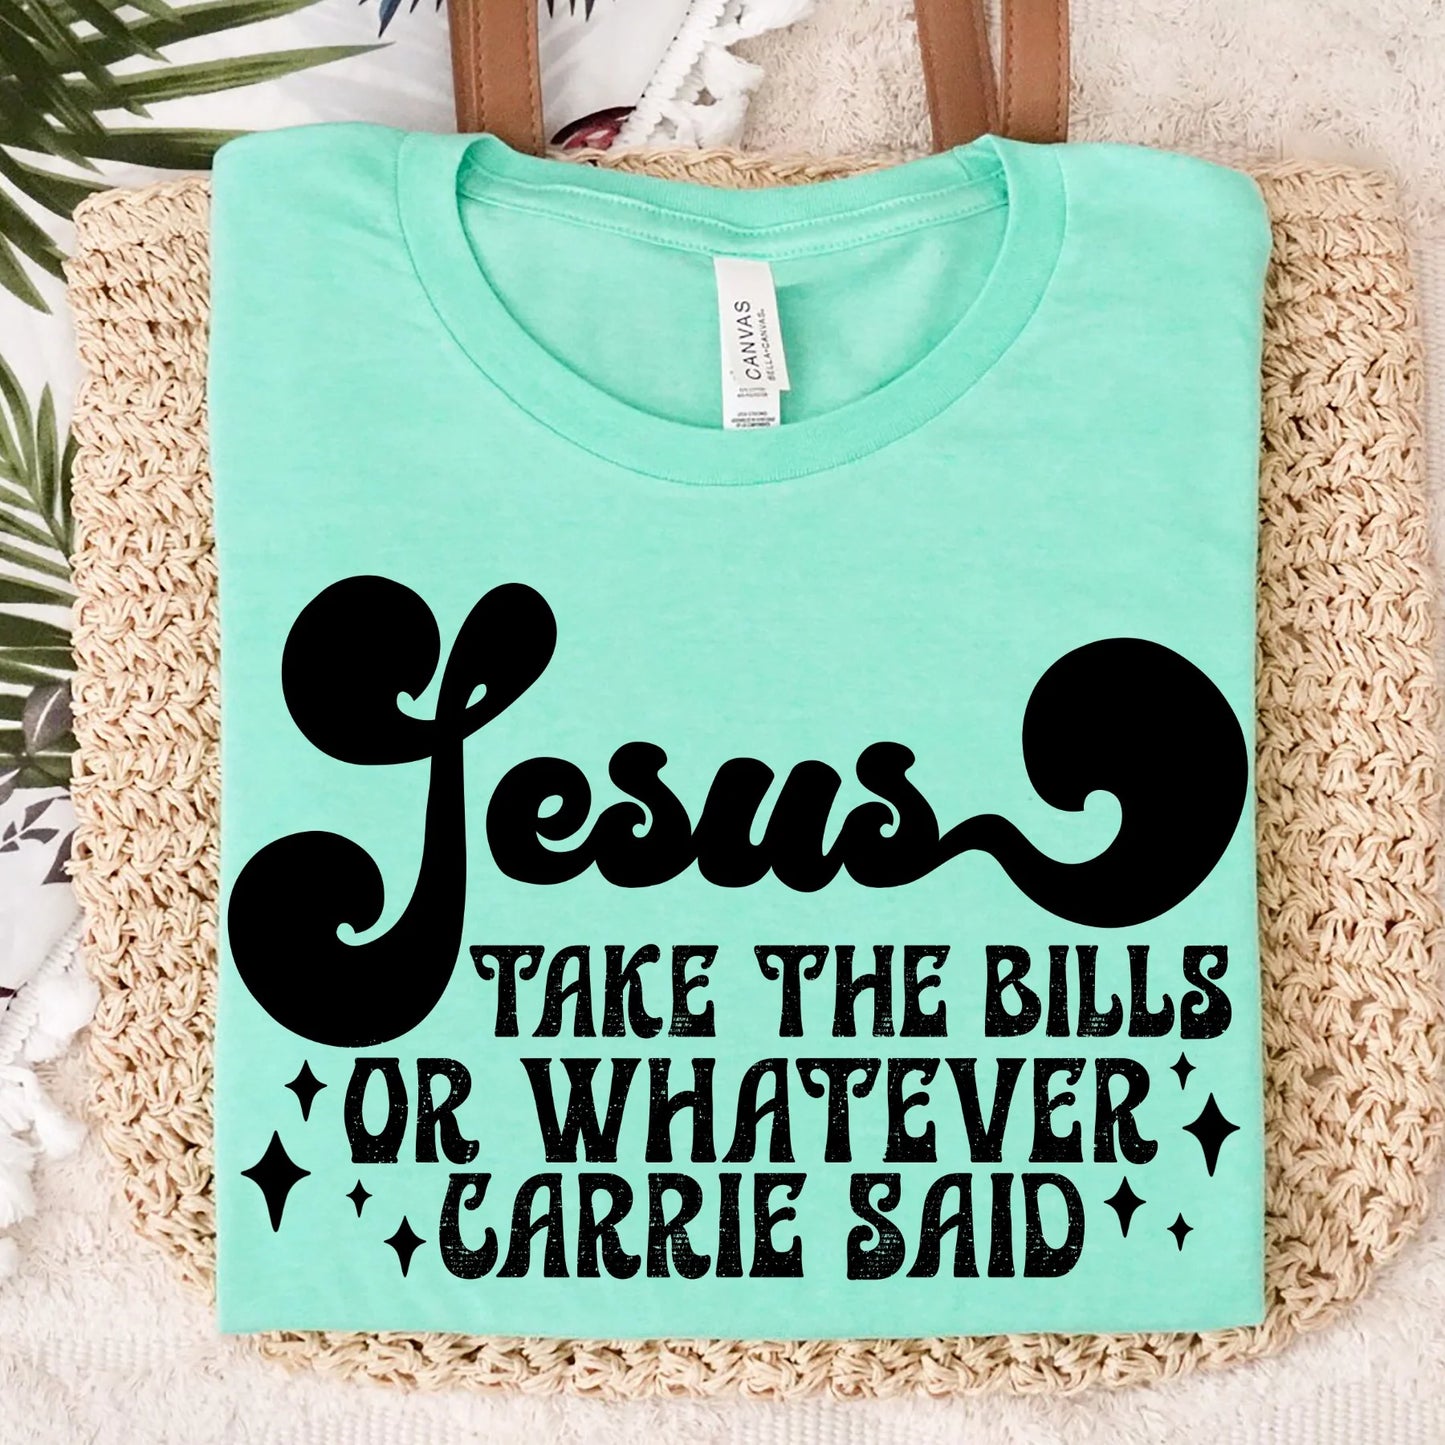 Jesus Take the Bills or Whatever Carrie Said